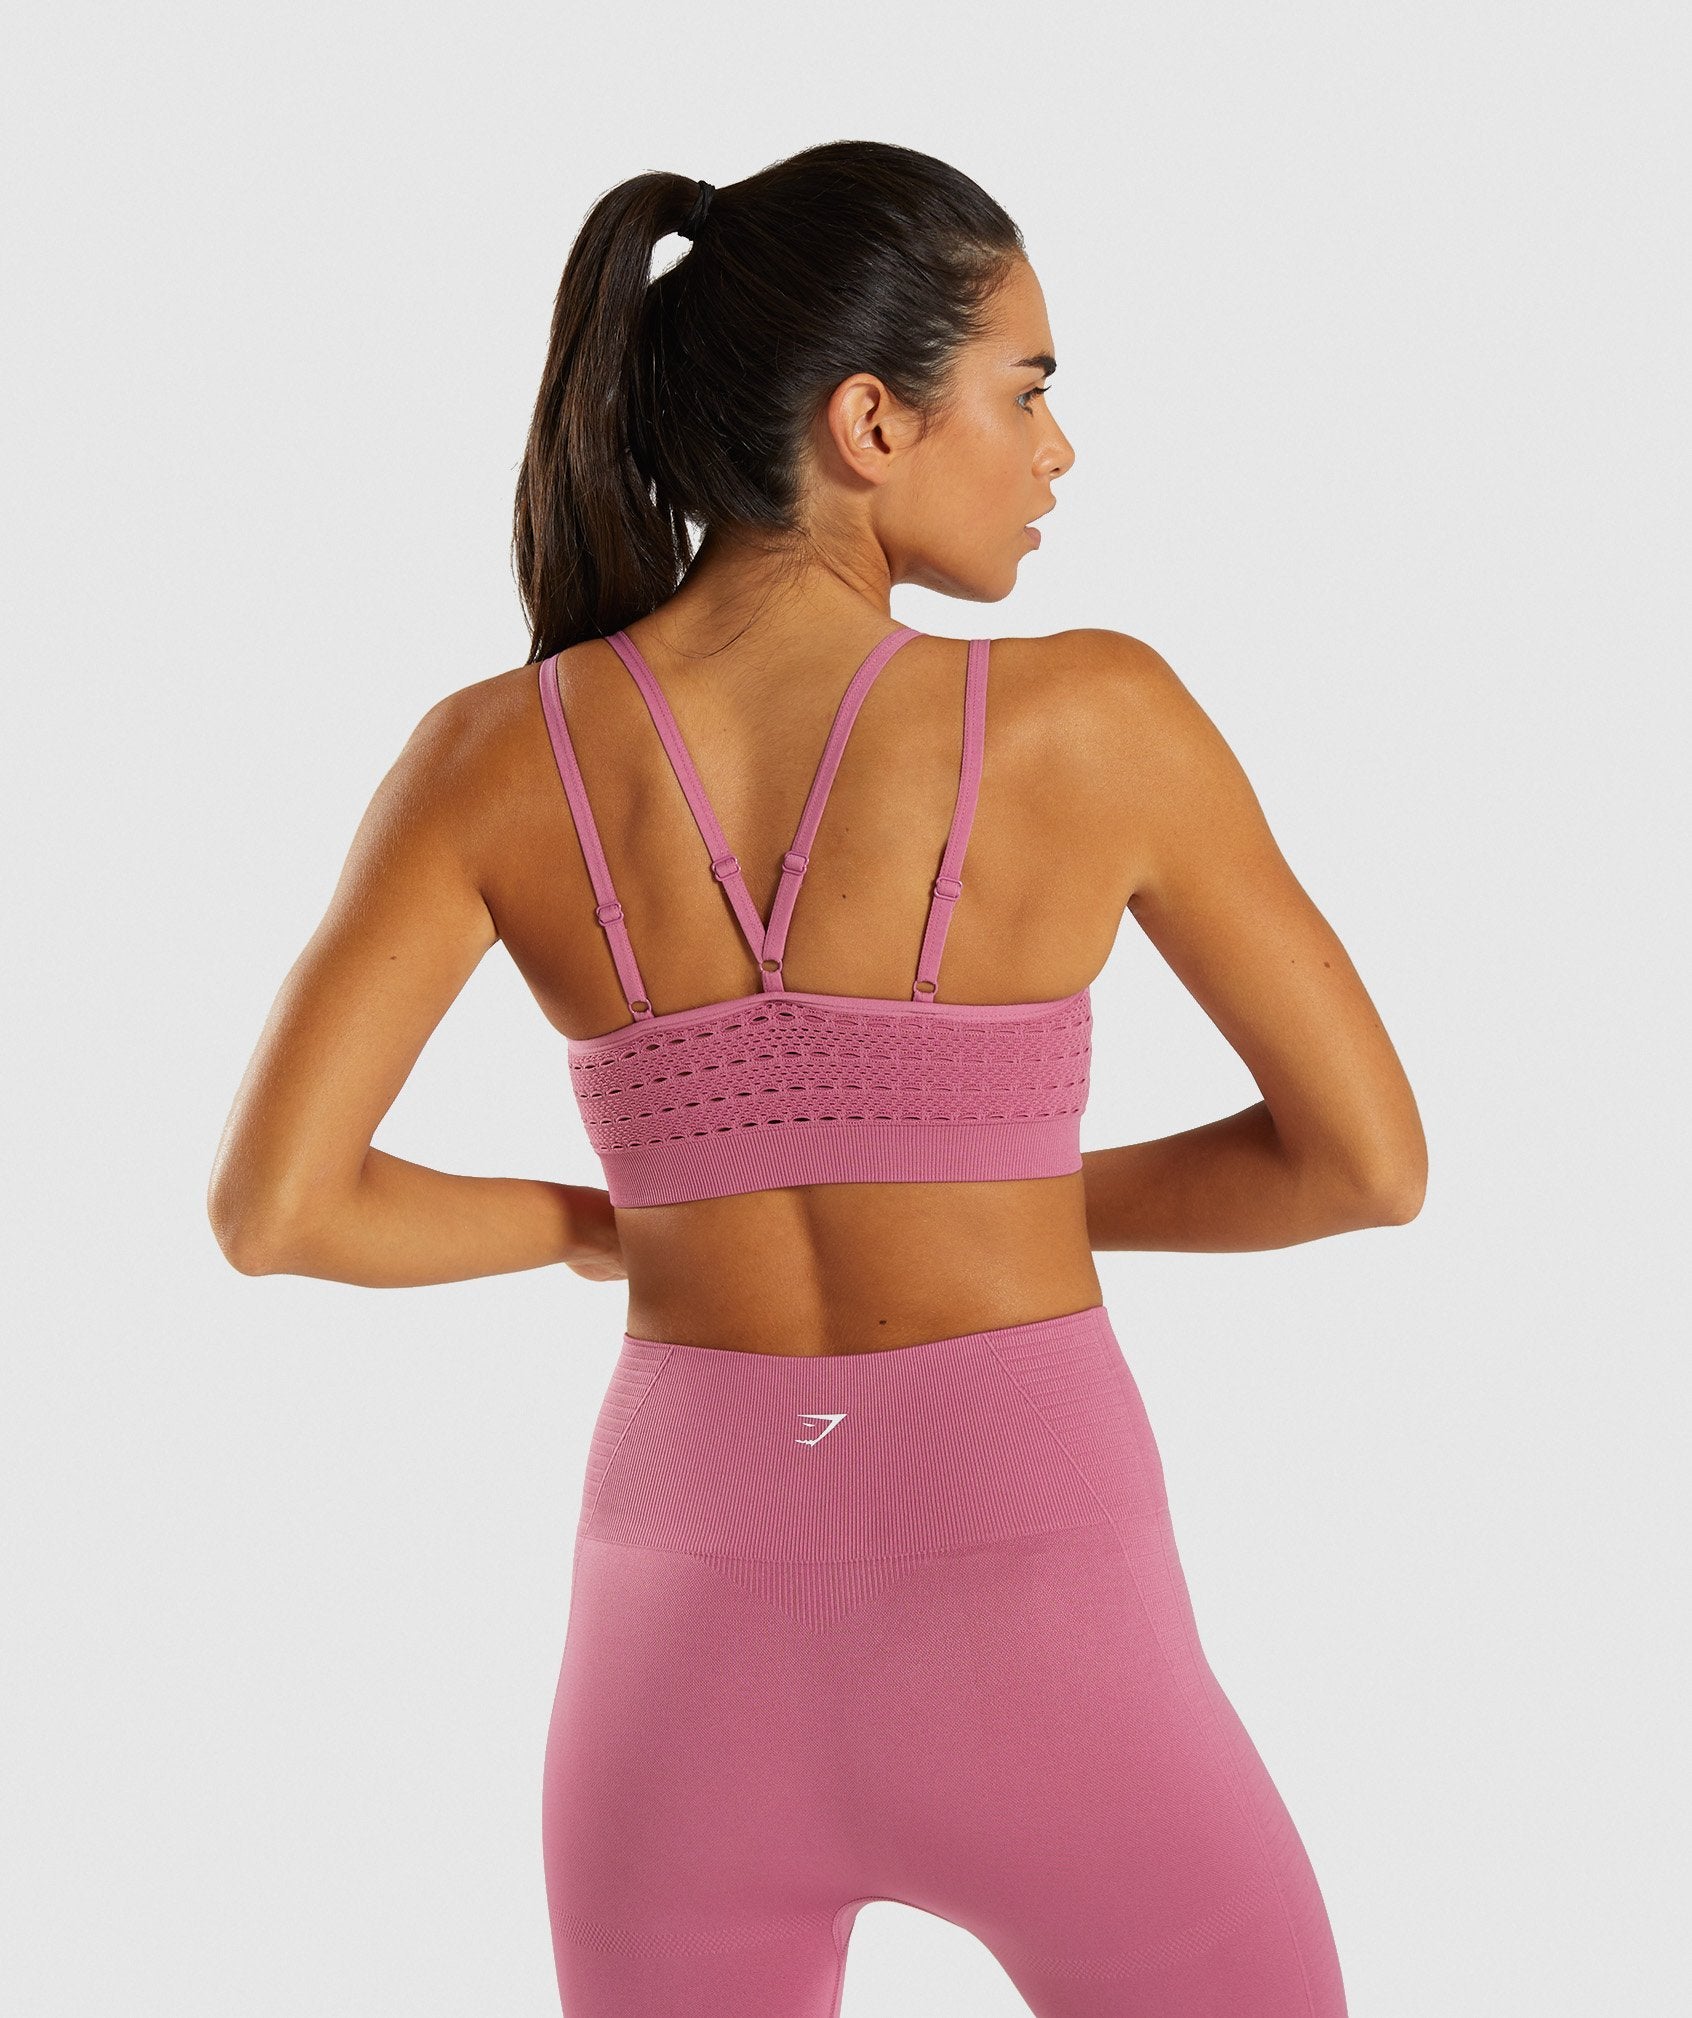 Energy+ Seamless Sports Bra in Dusky Pink - view 2